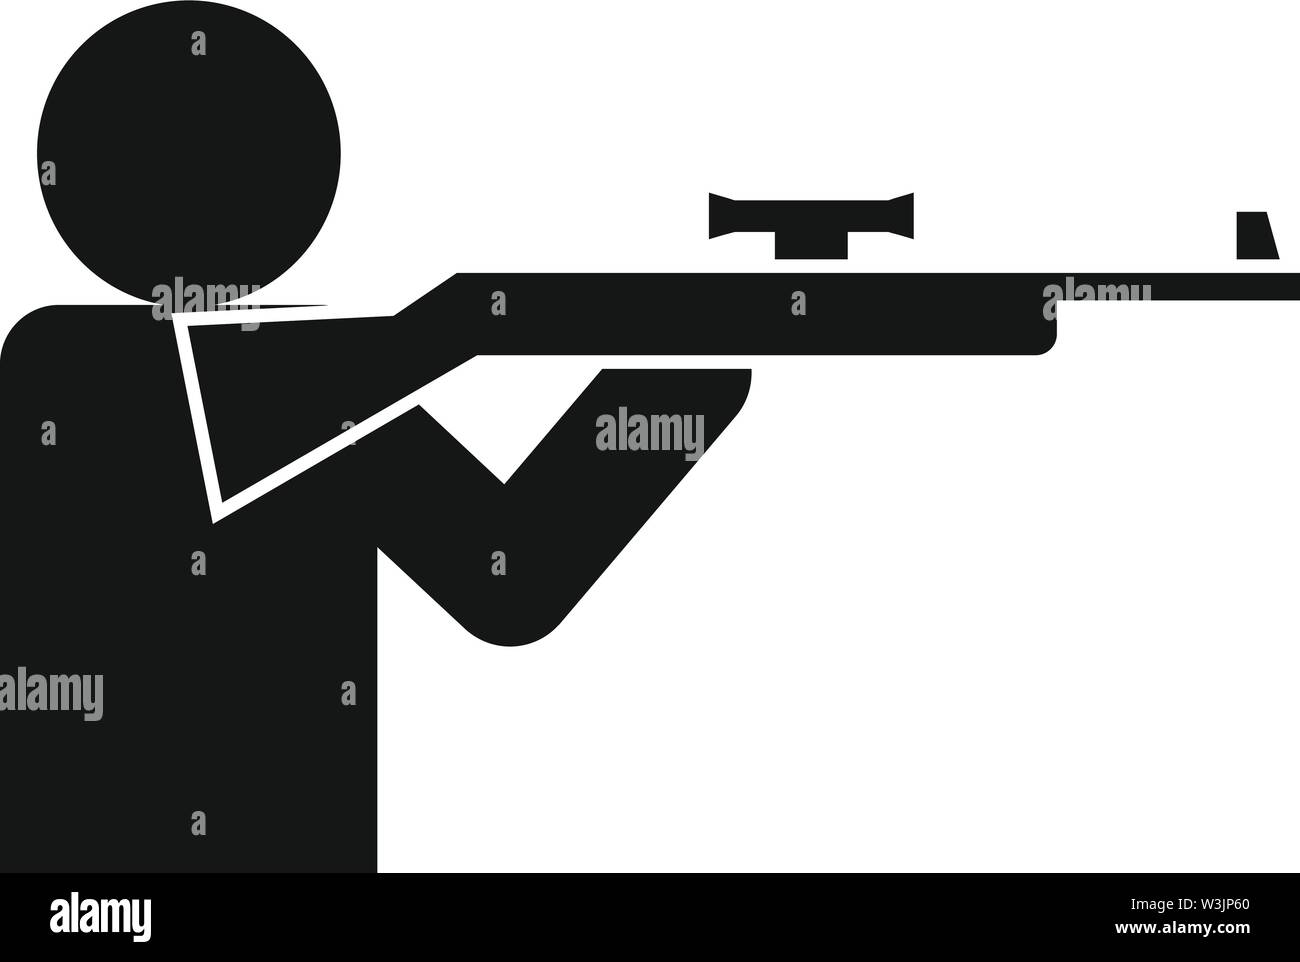 https://c8.alamy.com/comp/W3JP60/sniper-shooter-icon-simple-illustration-of-sniper-shooter-vector-icon-for-web-design-isolated-on-white-background-W3JP60.jpg